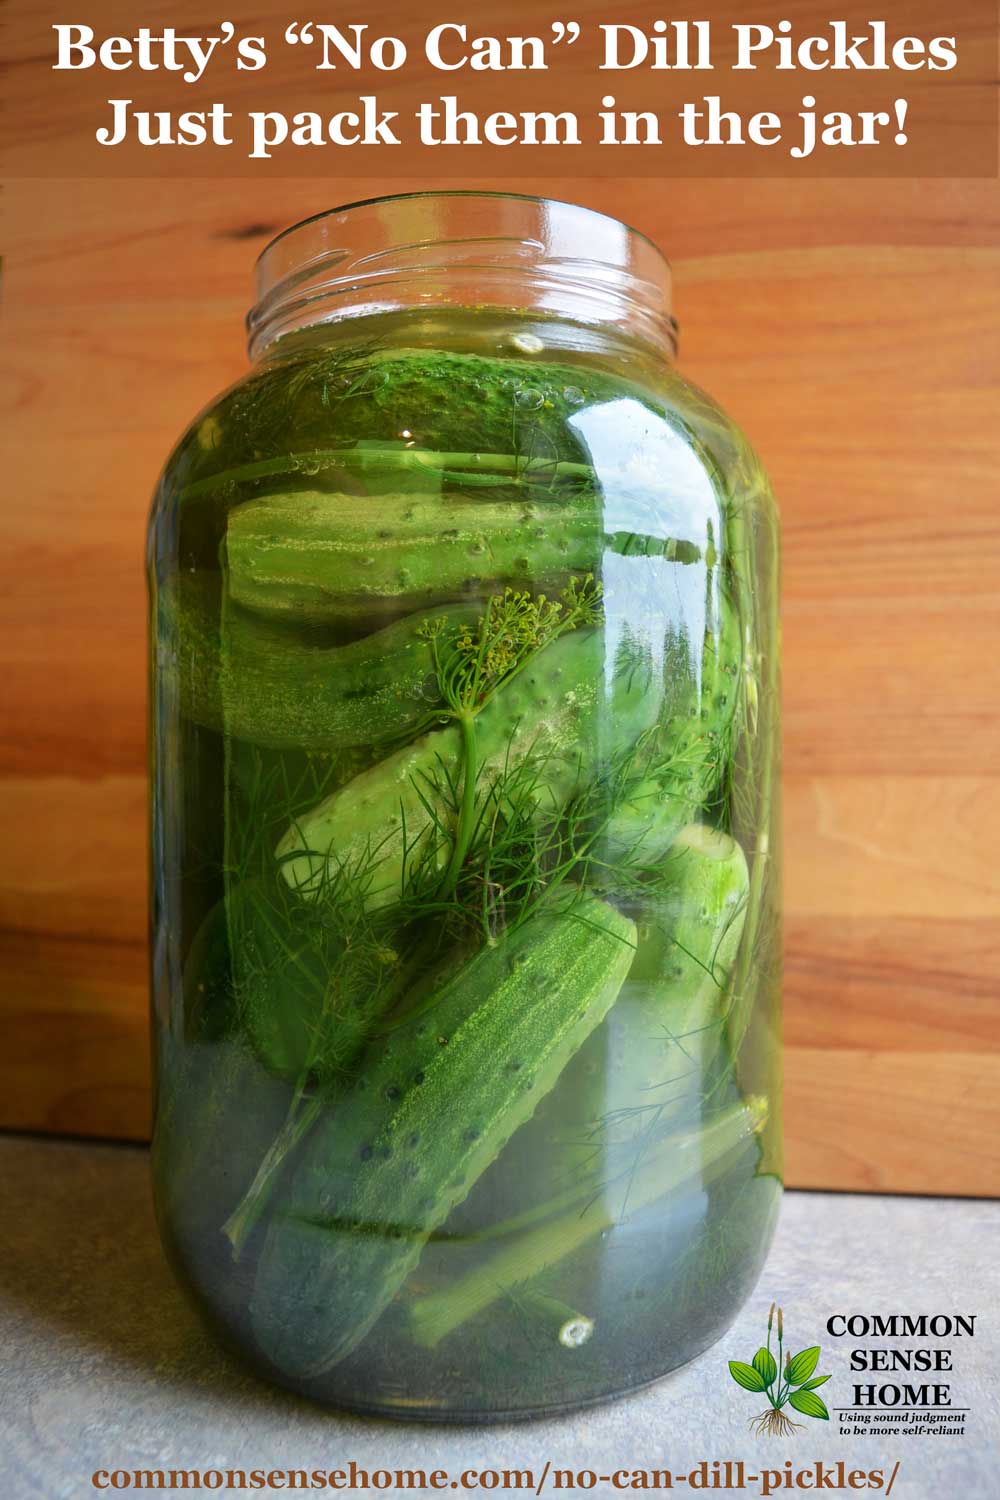 Pickle juice for an acid reflux remedy